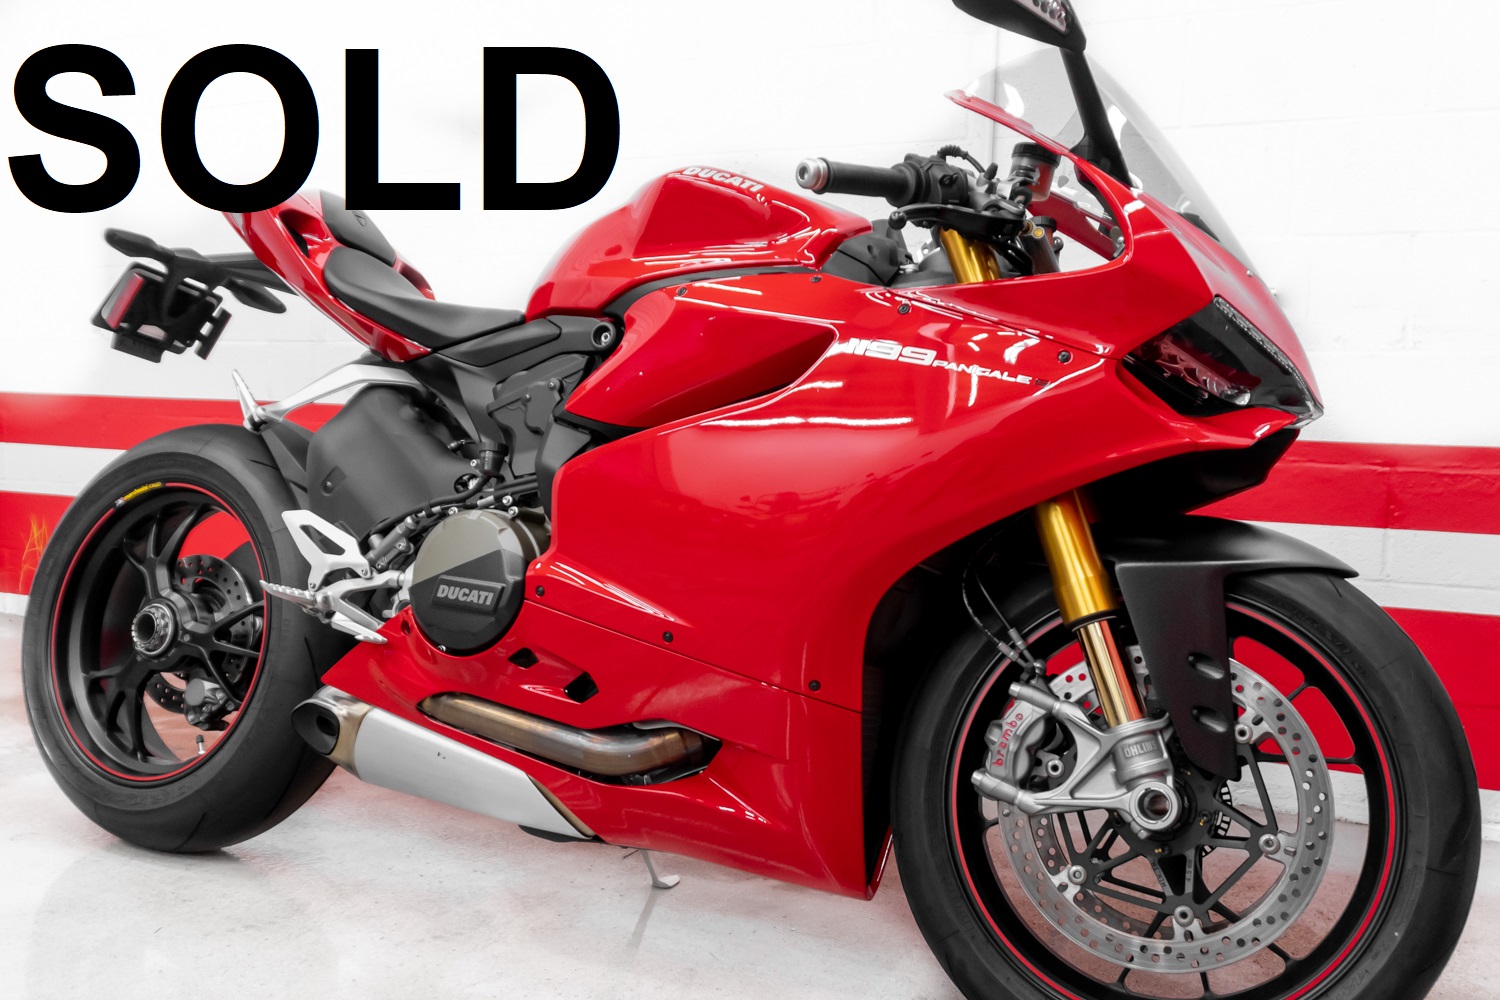 2013 Ducati 1199 Panigale S (ABS)